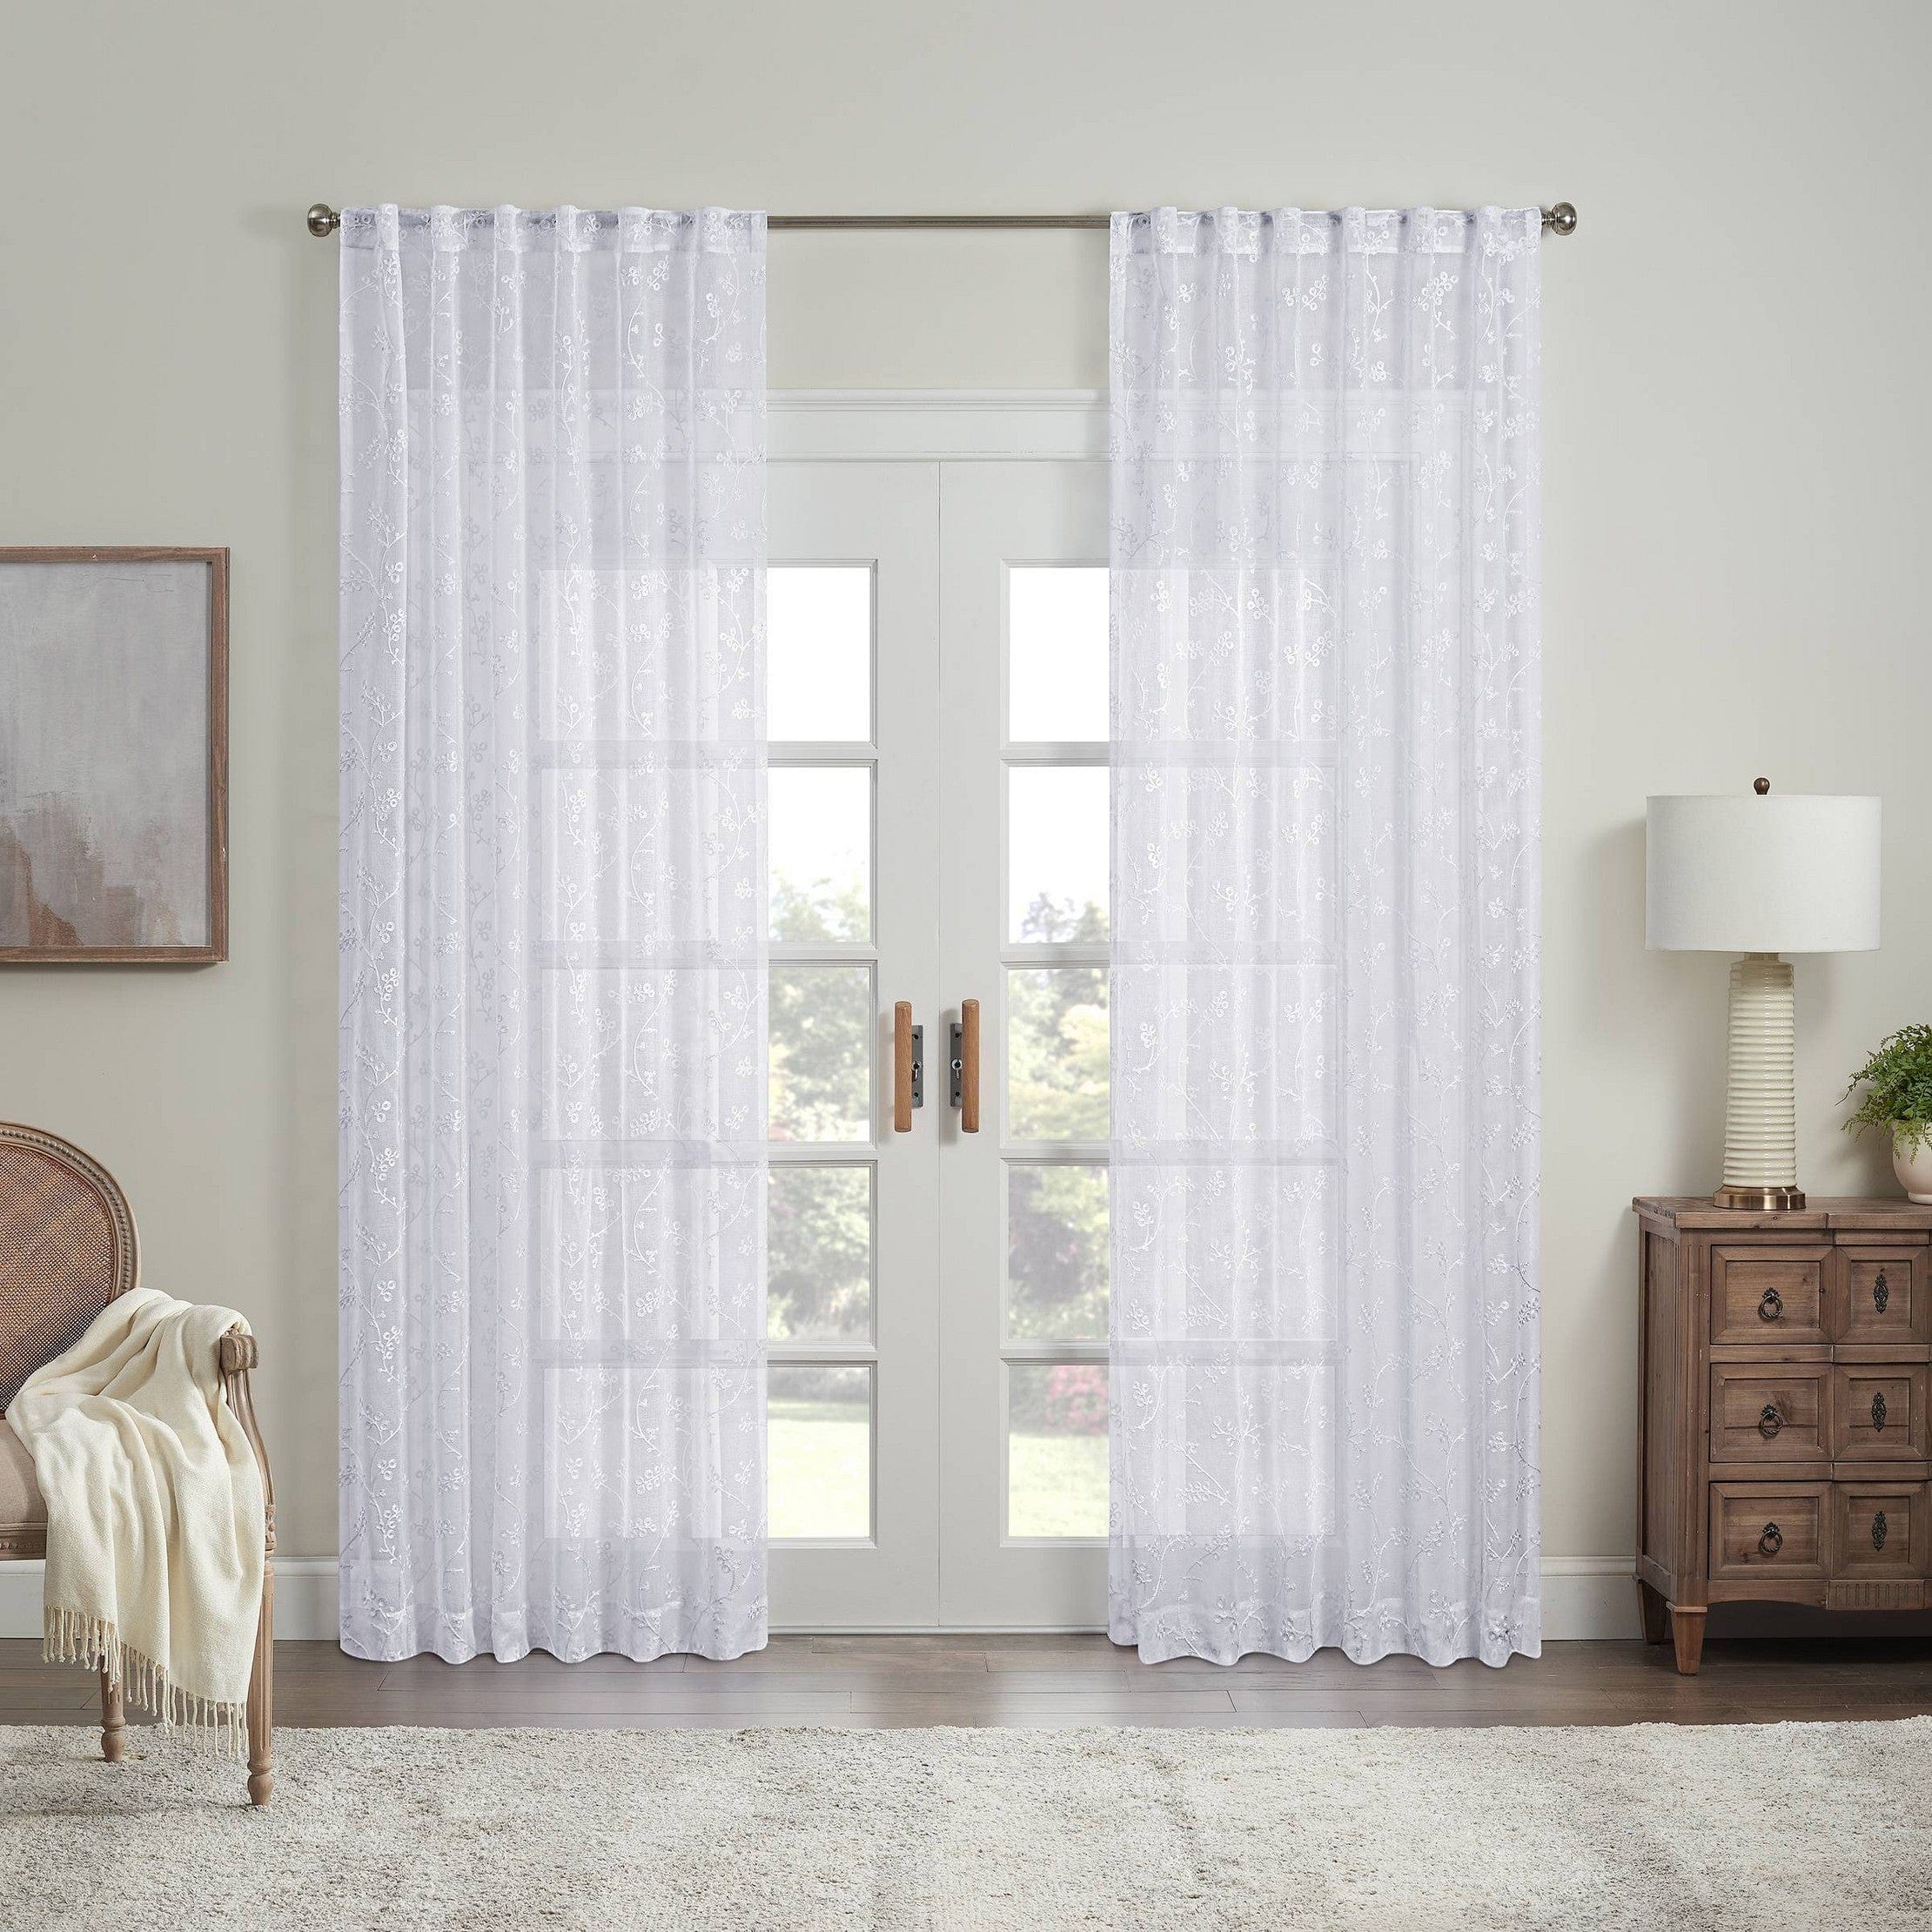 Indochine by Waverly Window Panel Curtain in White 50 x 108